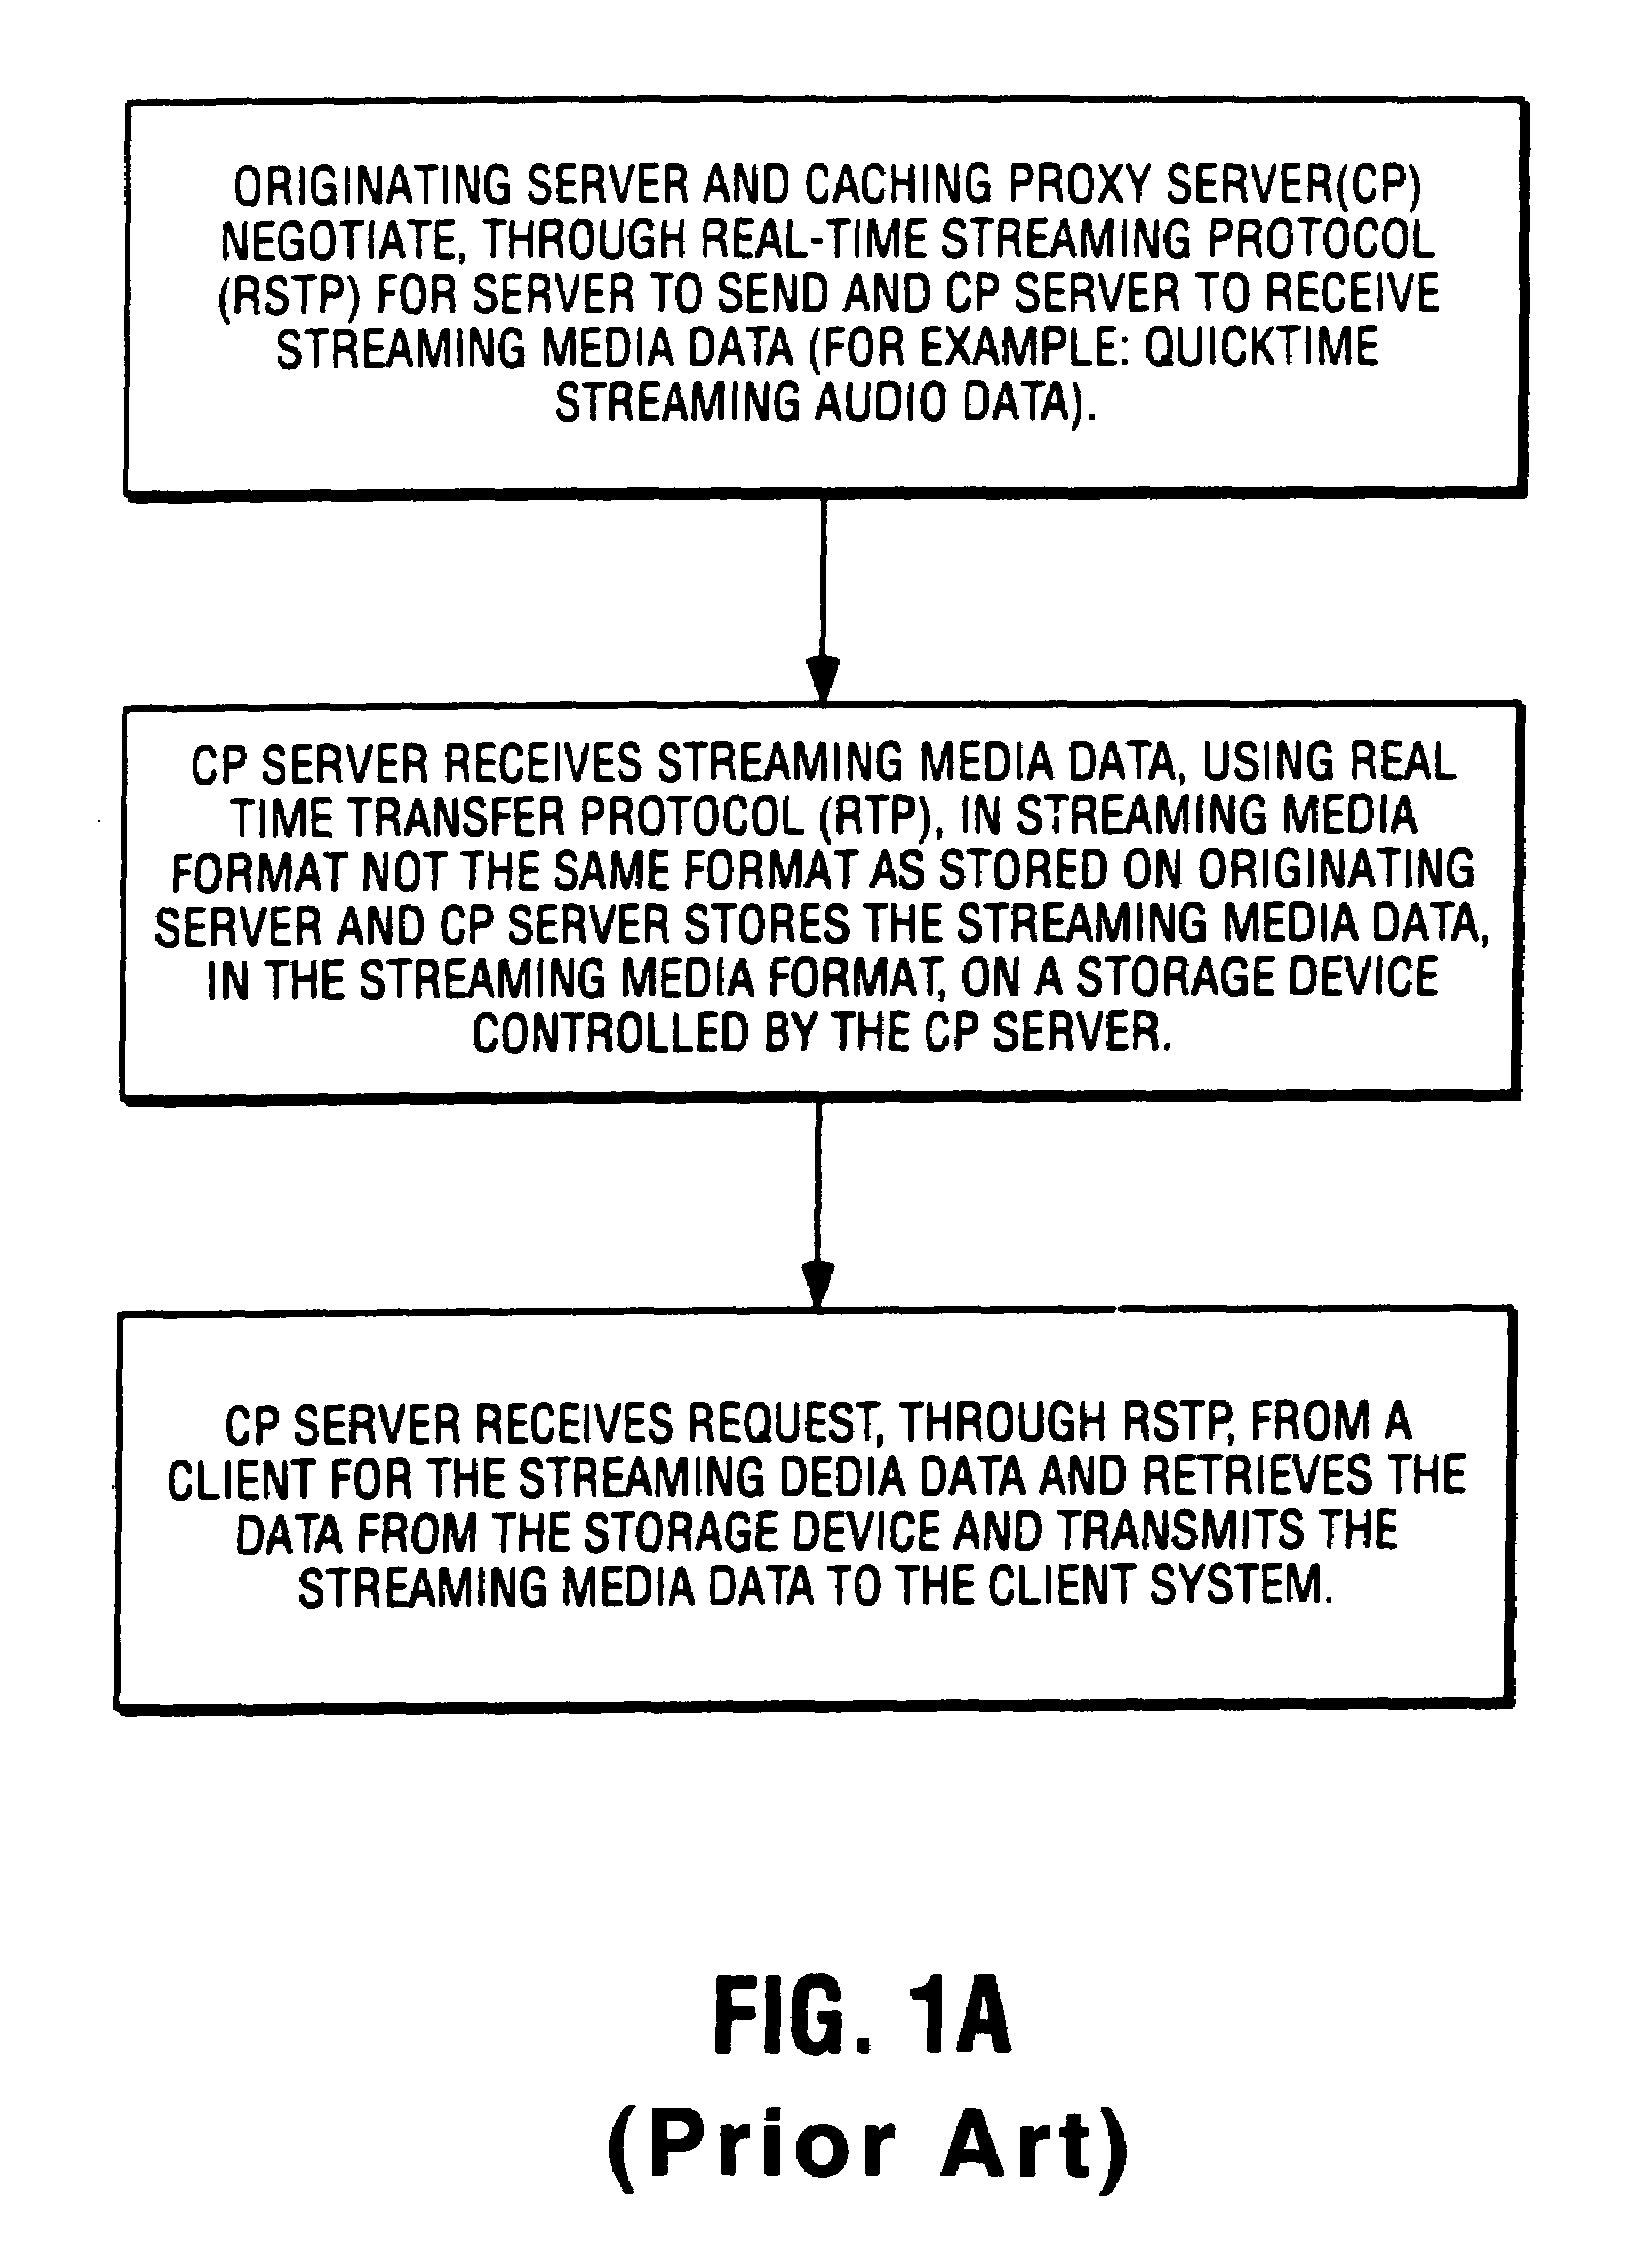 Methods and apparatuses for representing and transferring various types of streaming media data